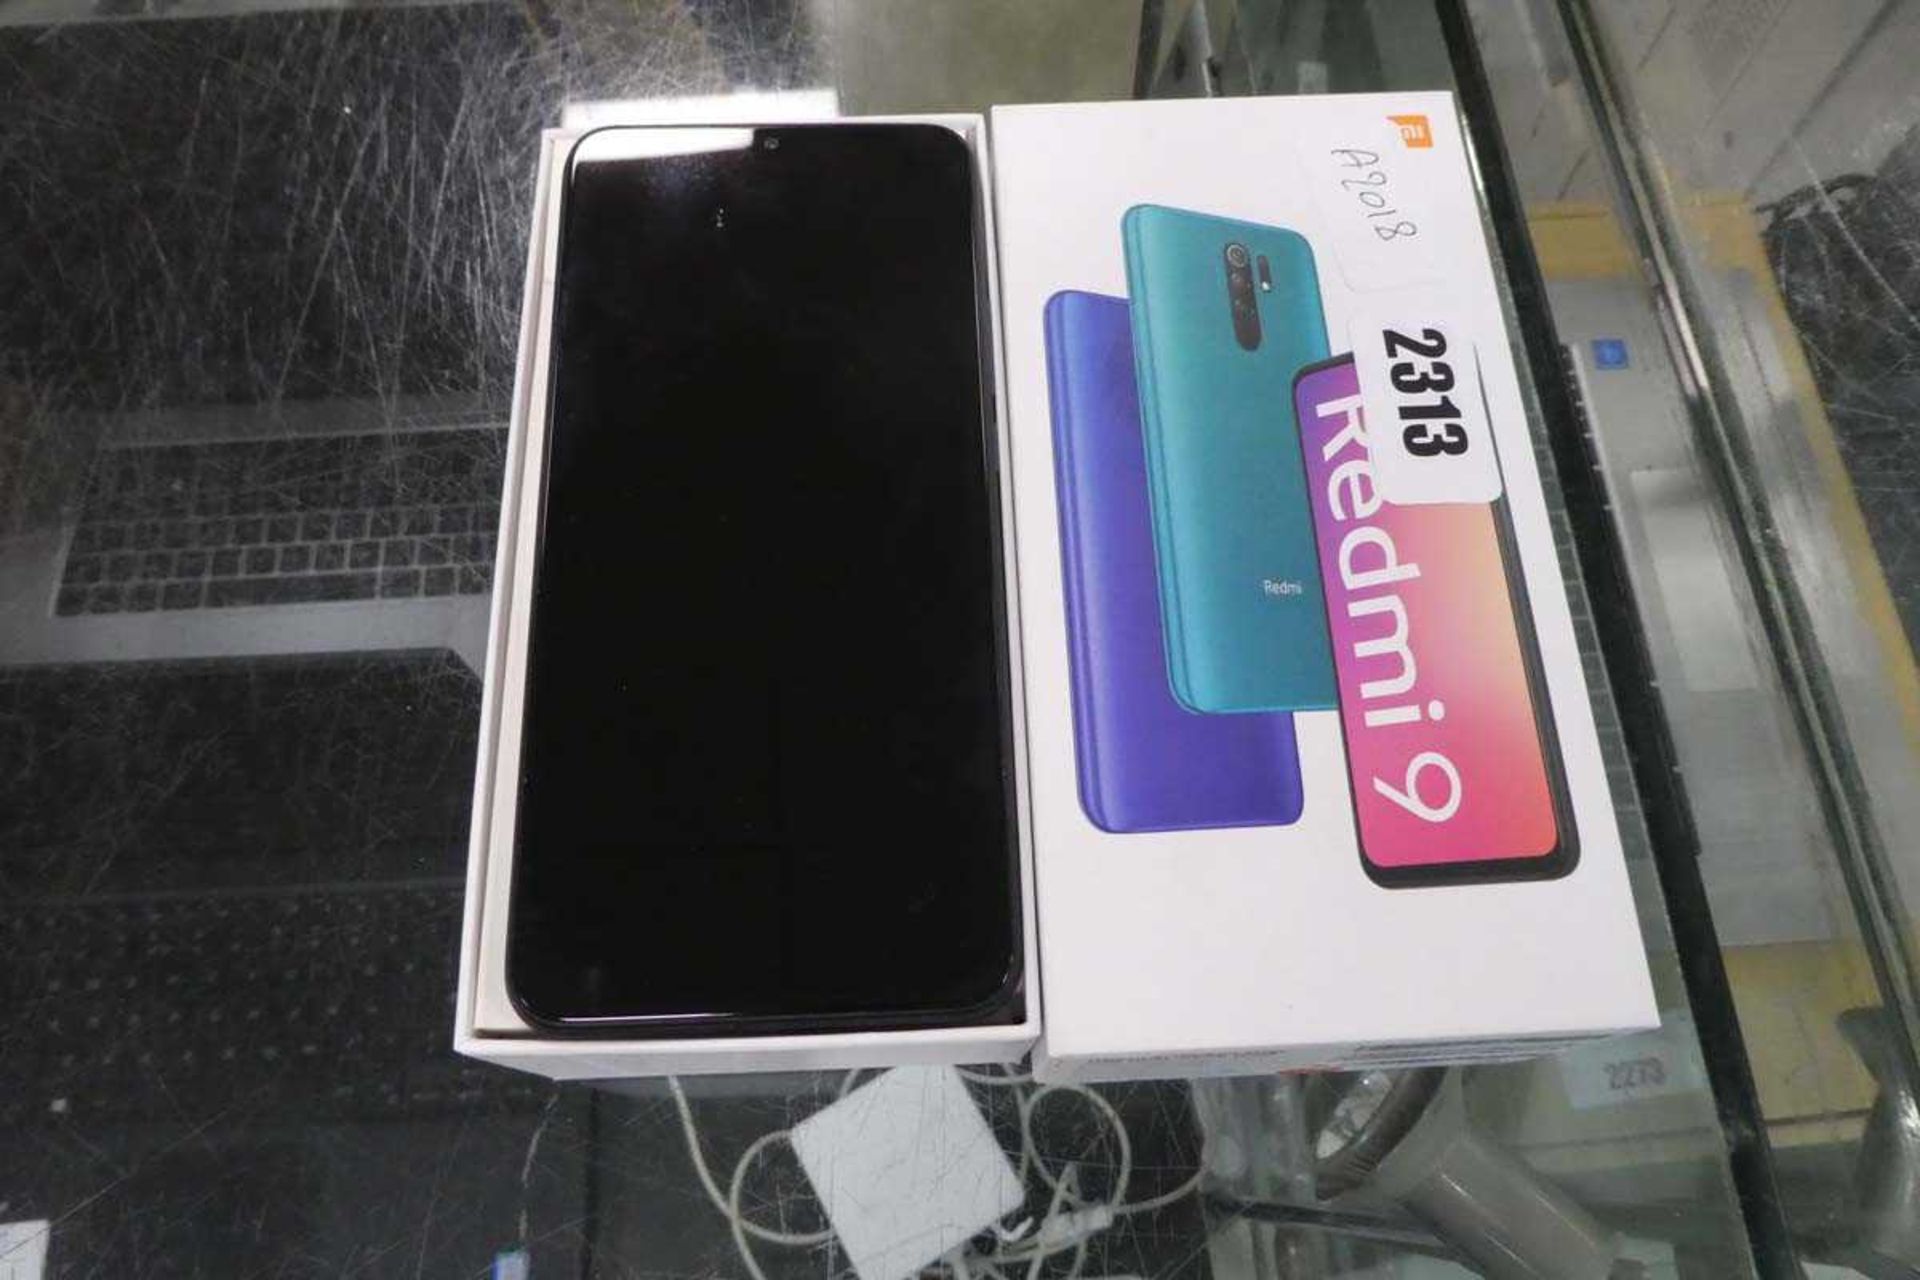 RedMi 9 Android mobile phone, boxed